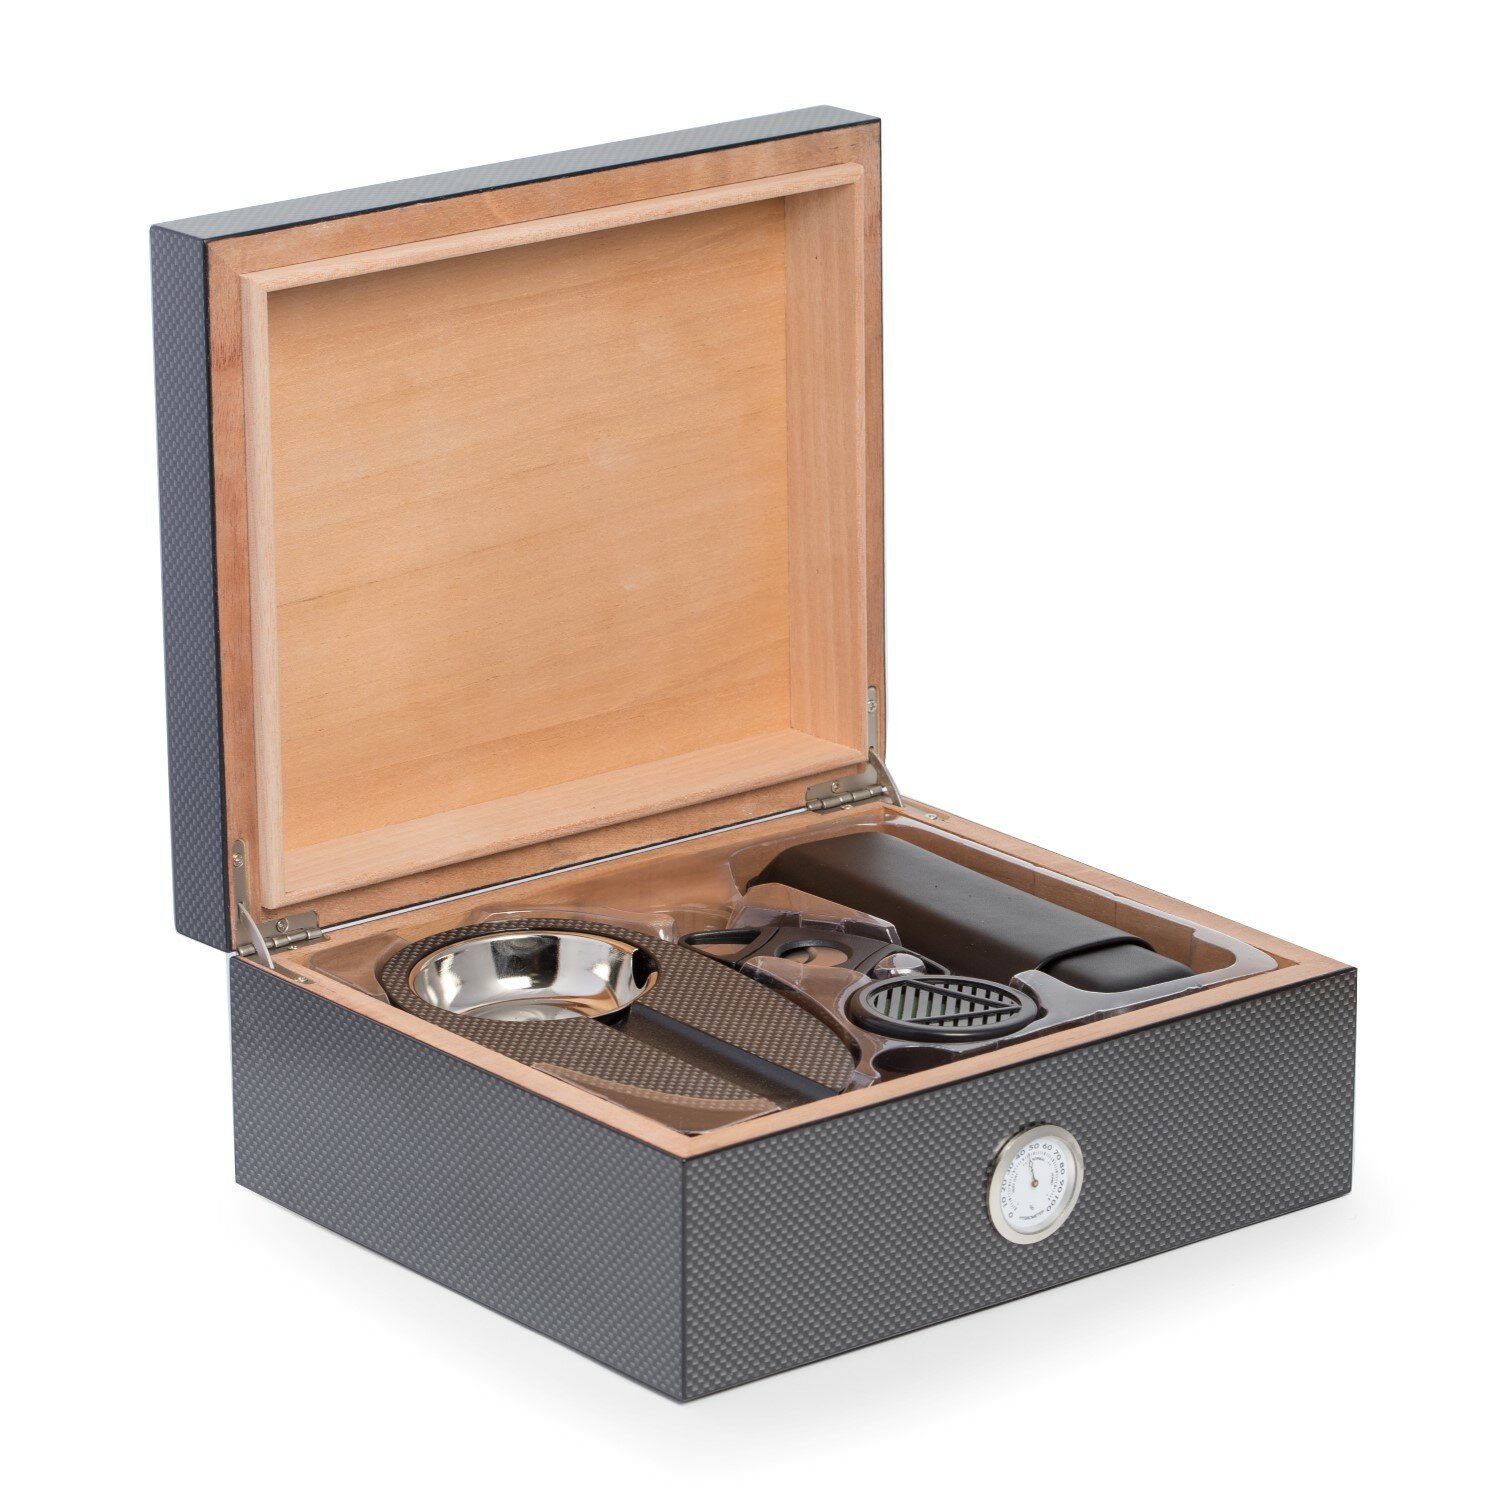 LUXURY TRAVEL HUMIDOR FOR THE CIGAR LOVER